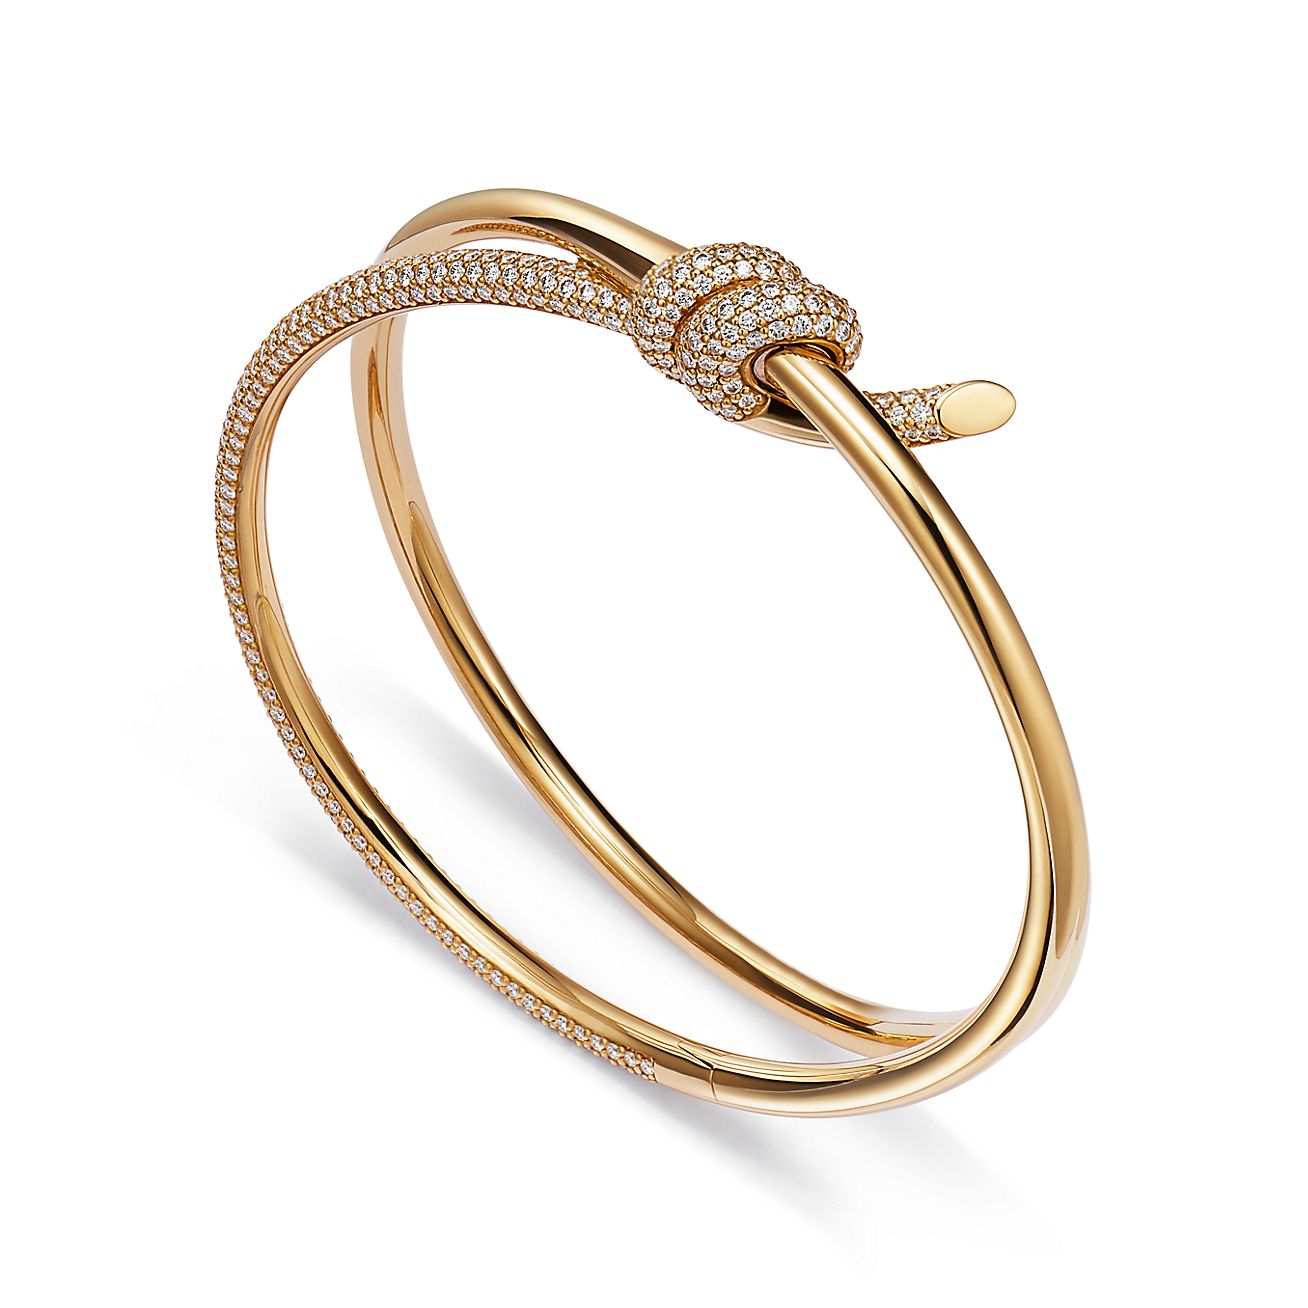 Tiffany Knot Double Row Hinged Bangle in Yellow Gold with Diamonds 